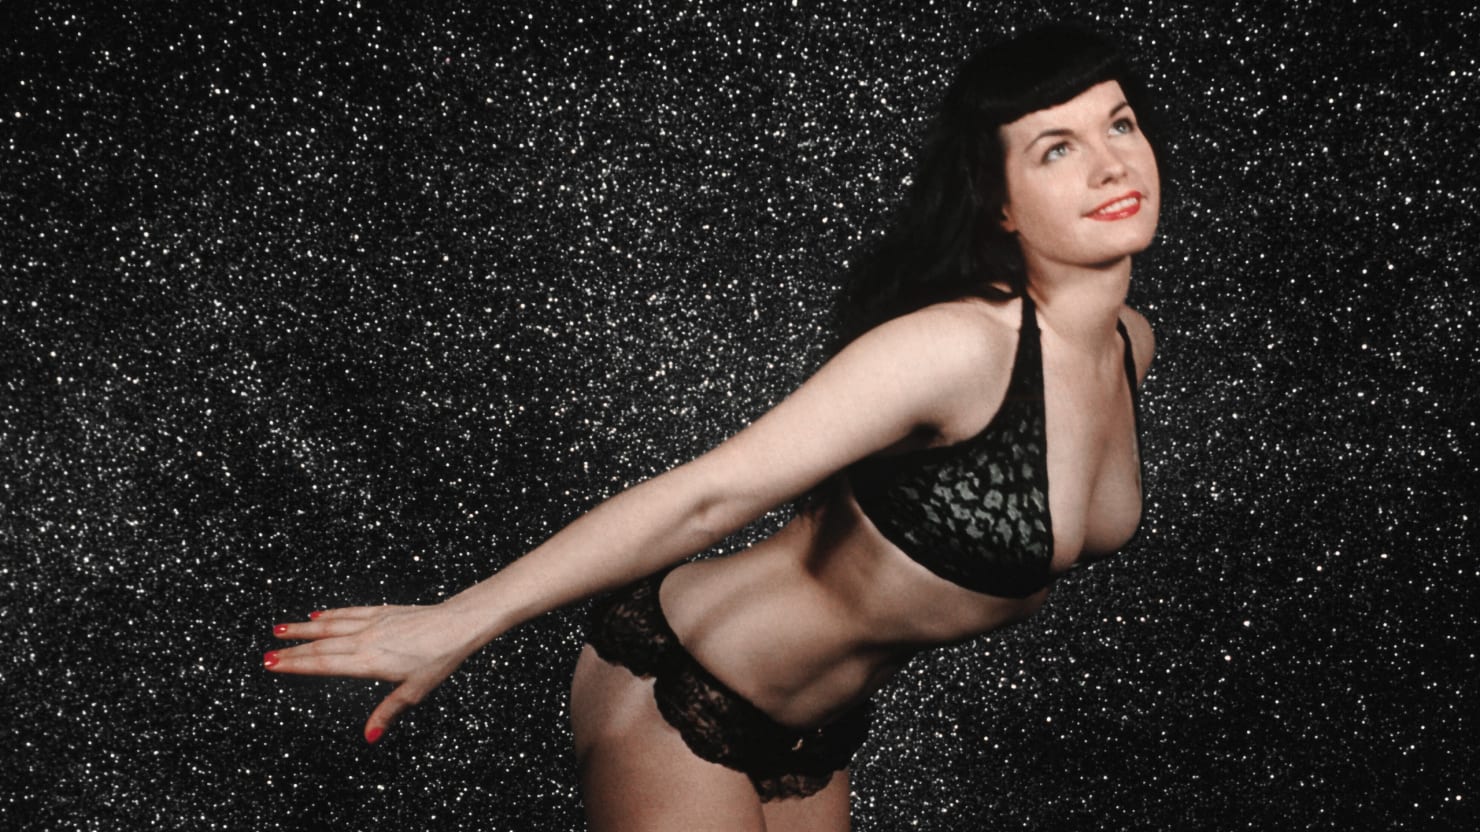 Bettie Page All,' A Look at the Pinup and Sexual Icon